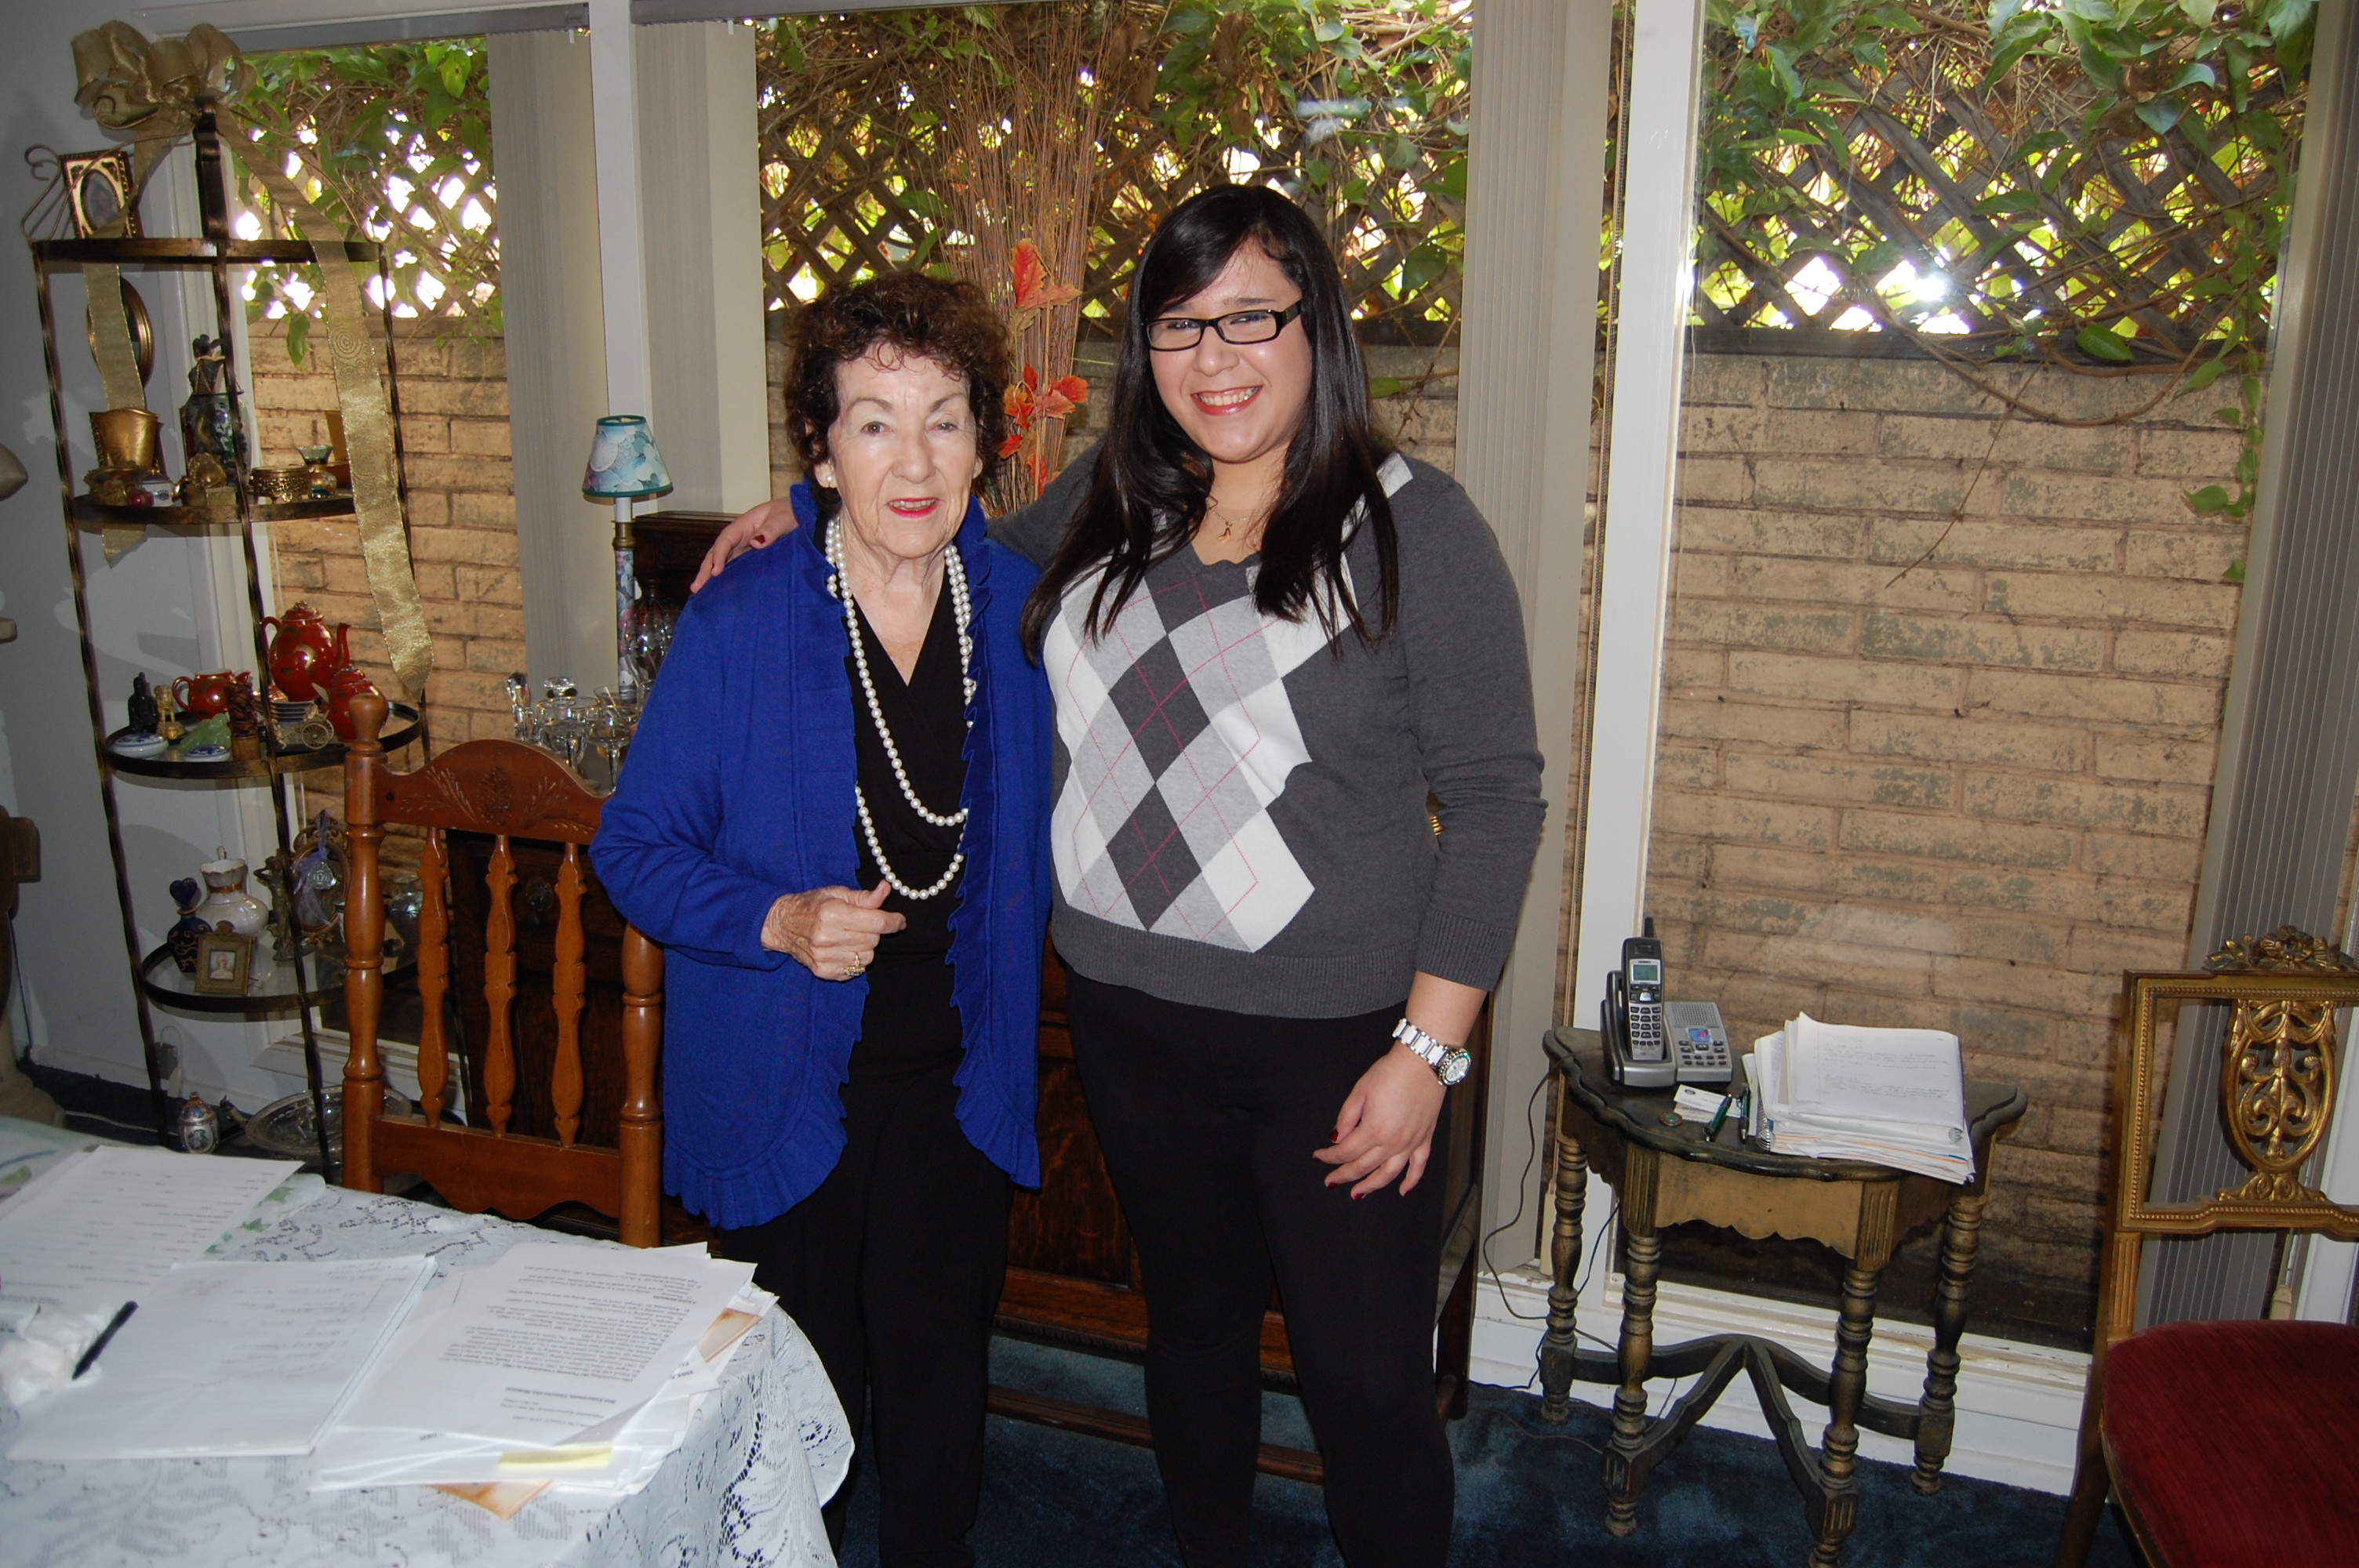 Ursula Kennedy stands with Natalie Navar in dining room